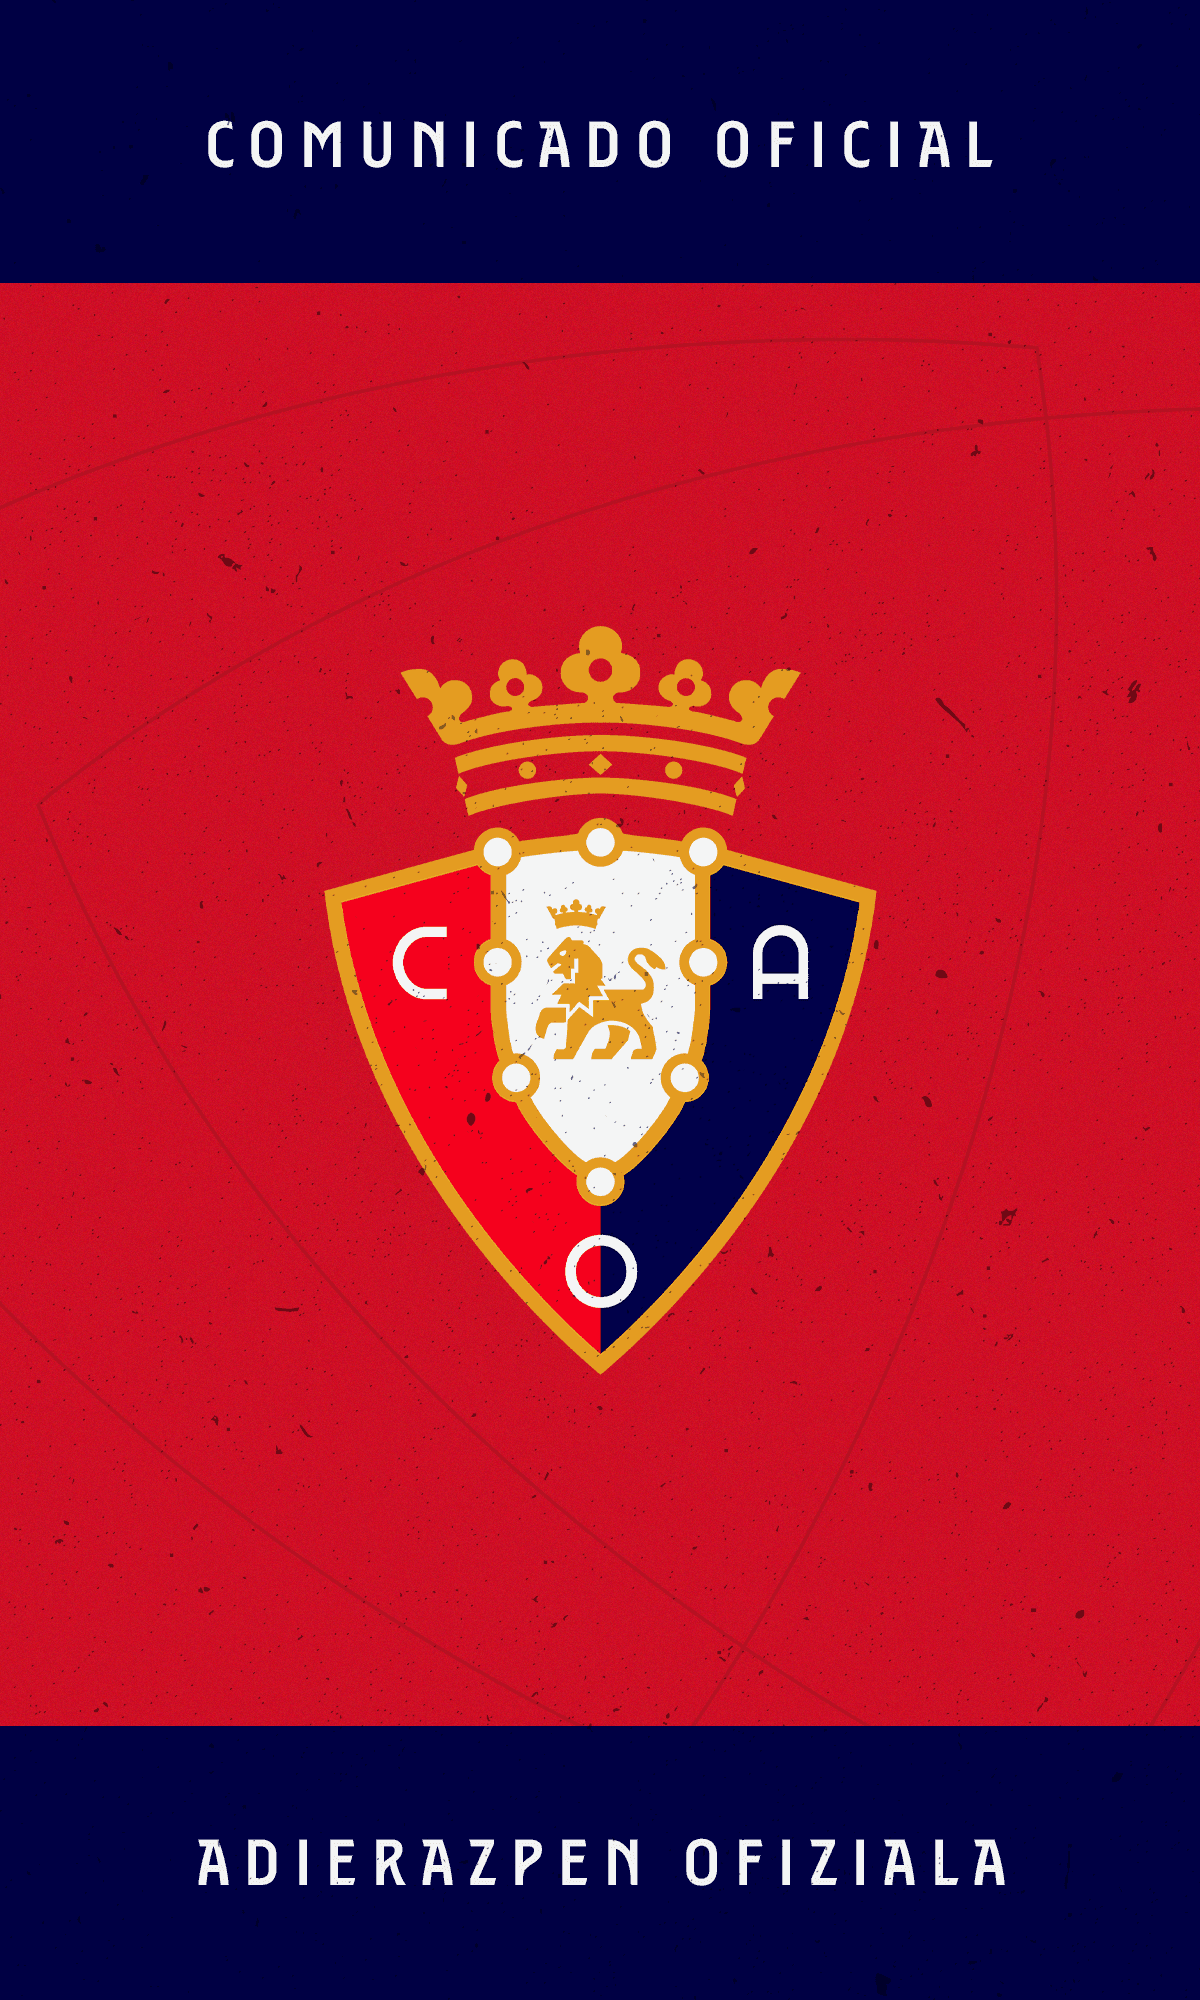 Osasuna ended 2023 with a loss of 1 million euros